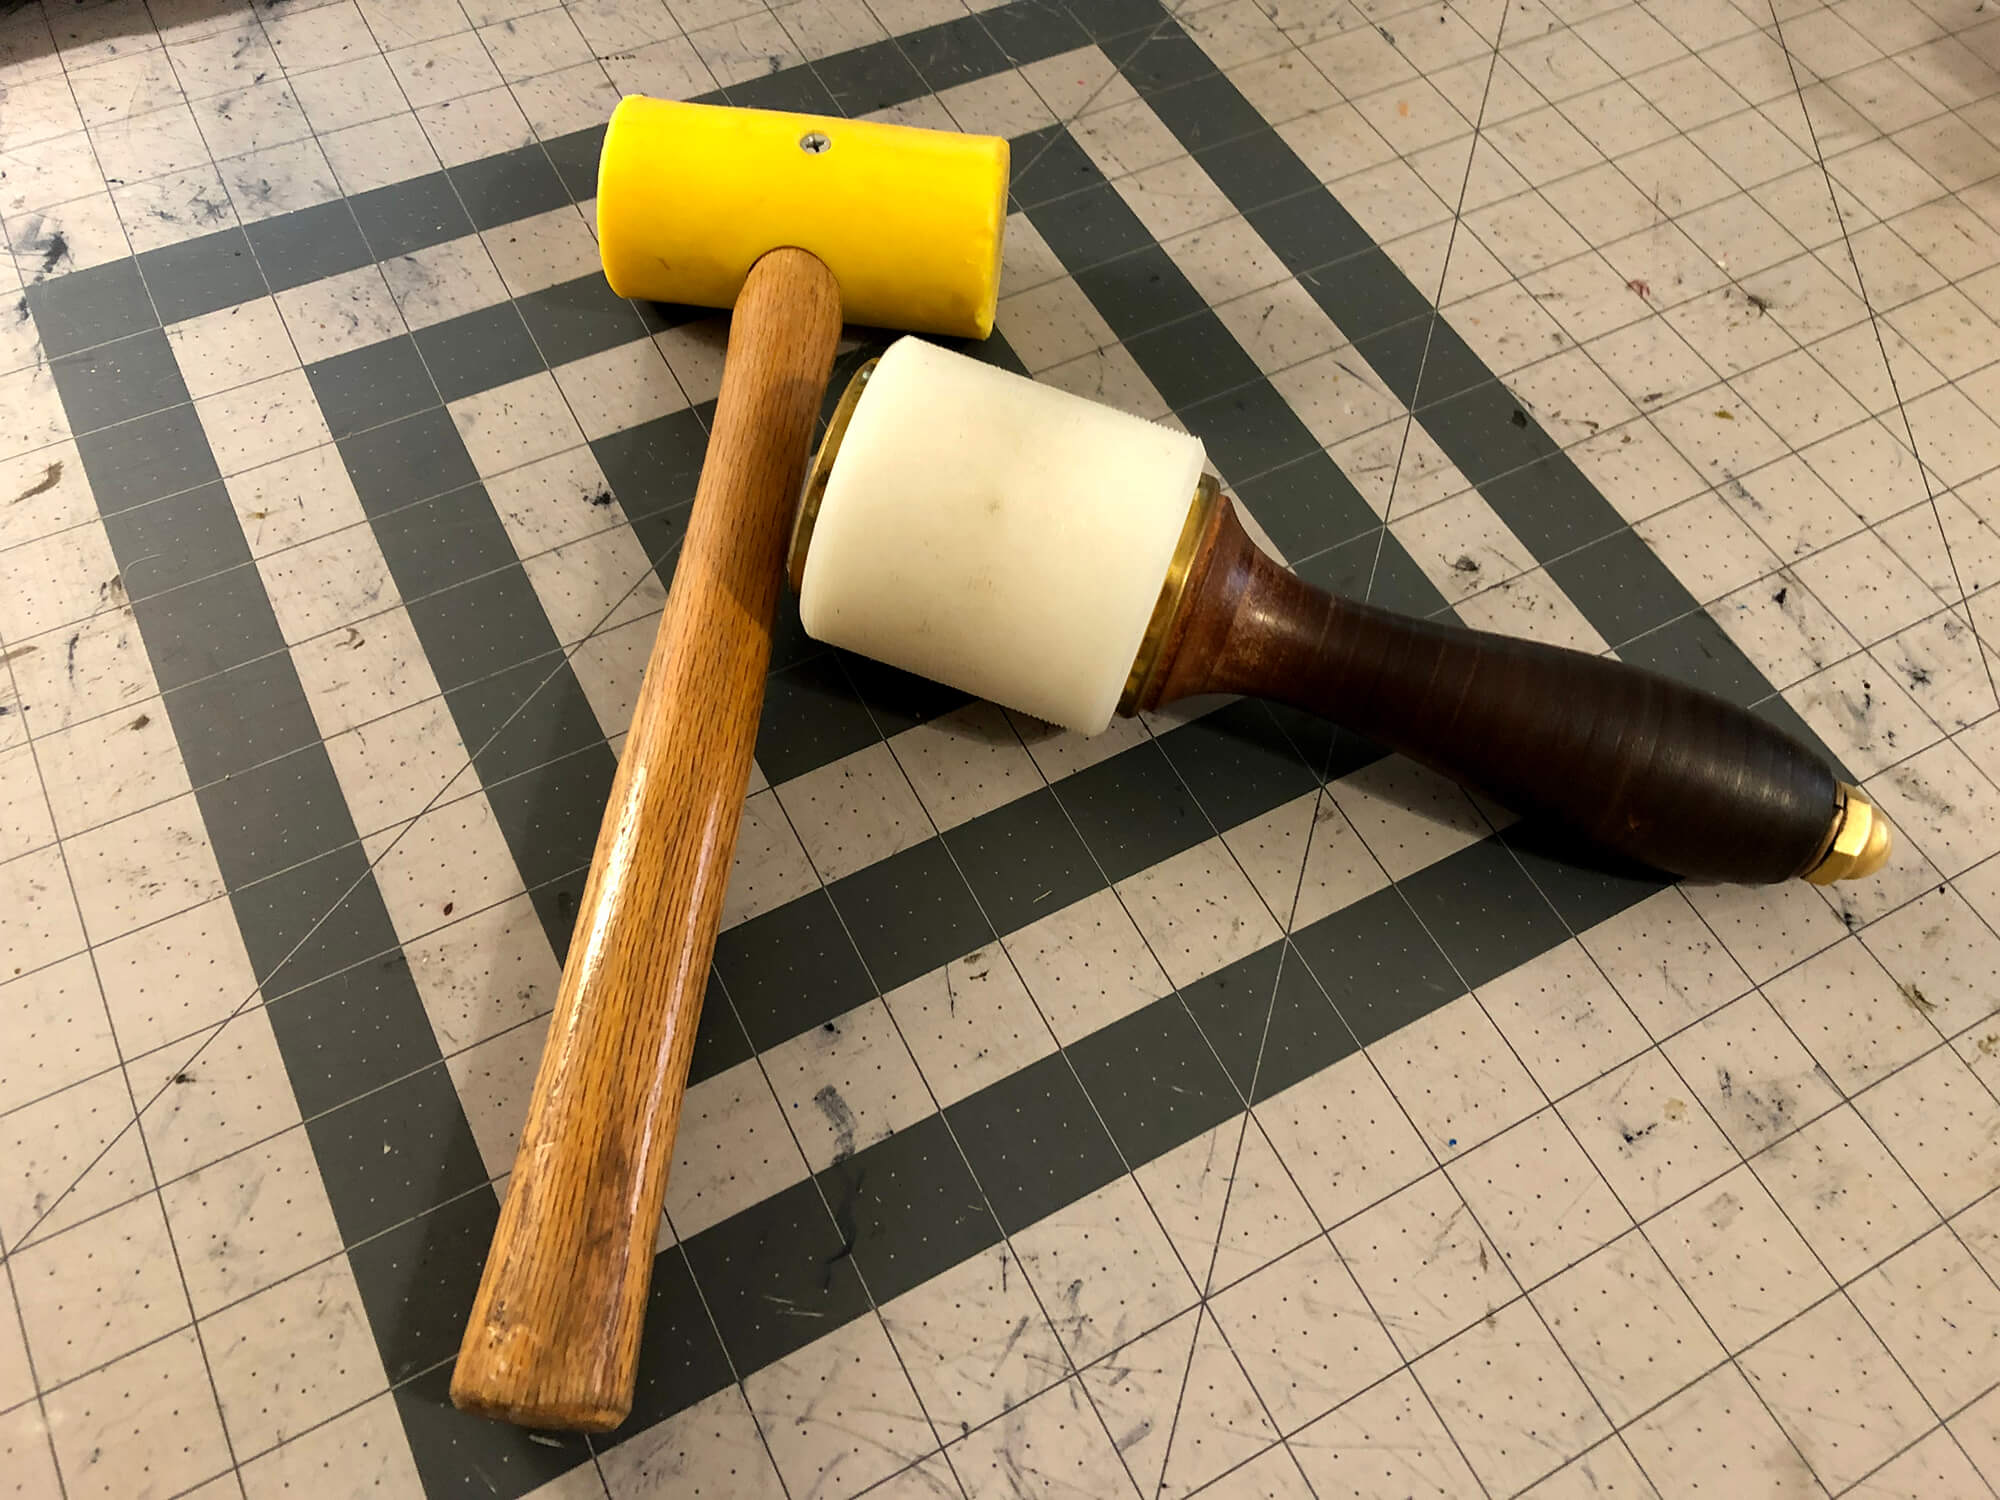 Leatherworker's Tools of the Trade